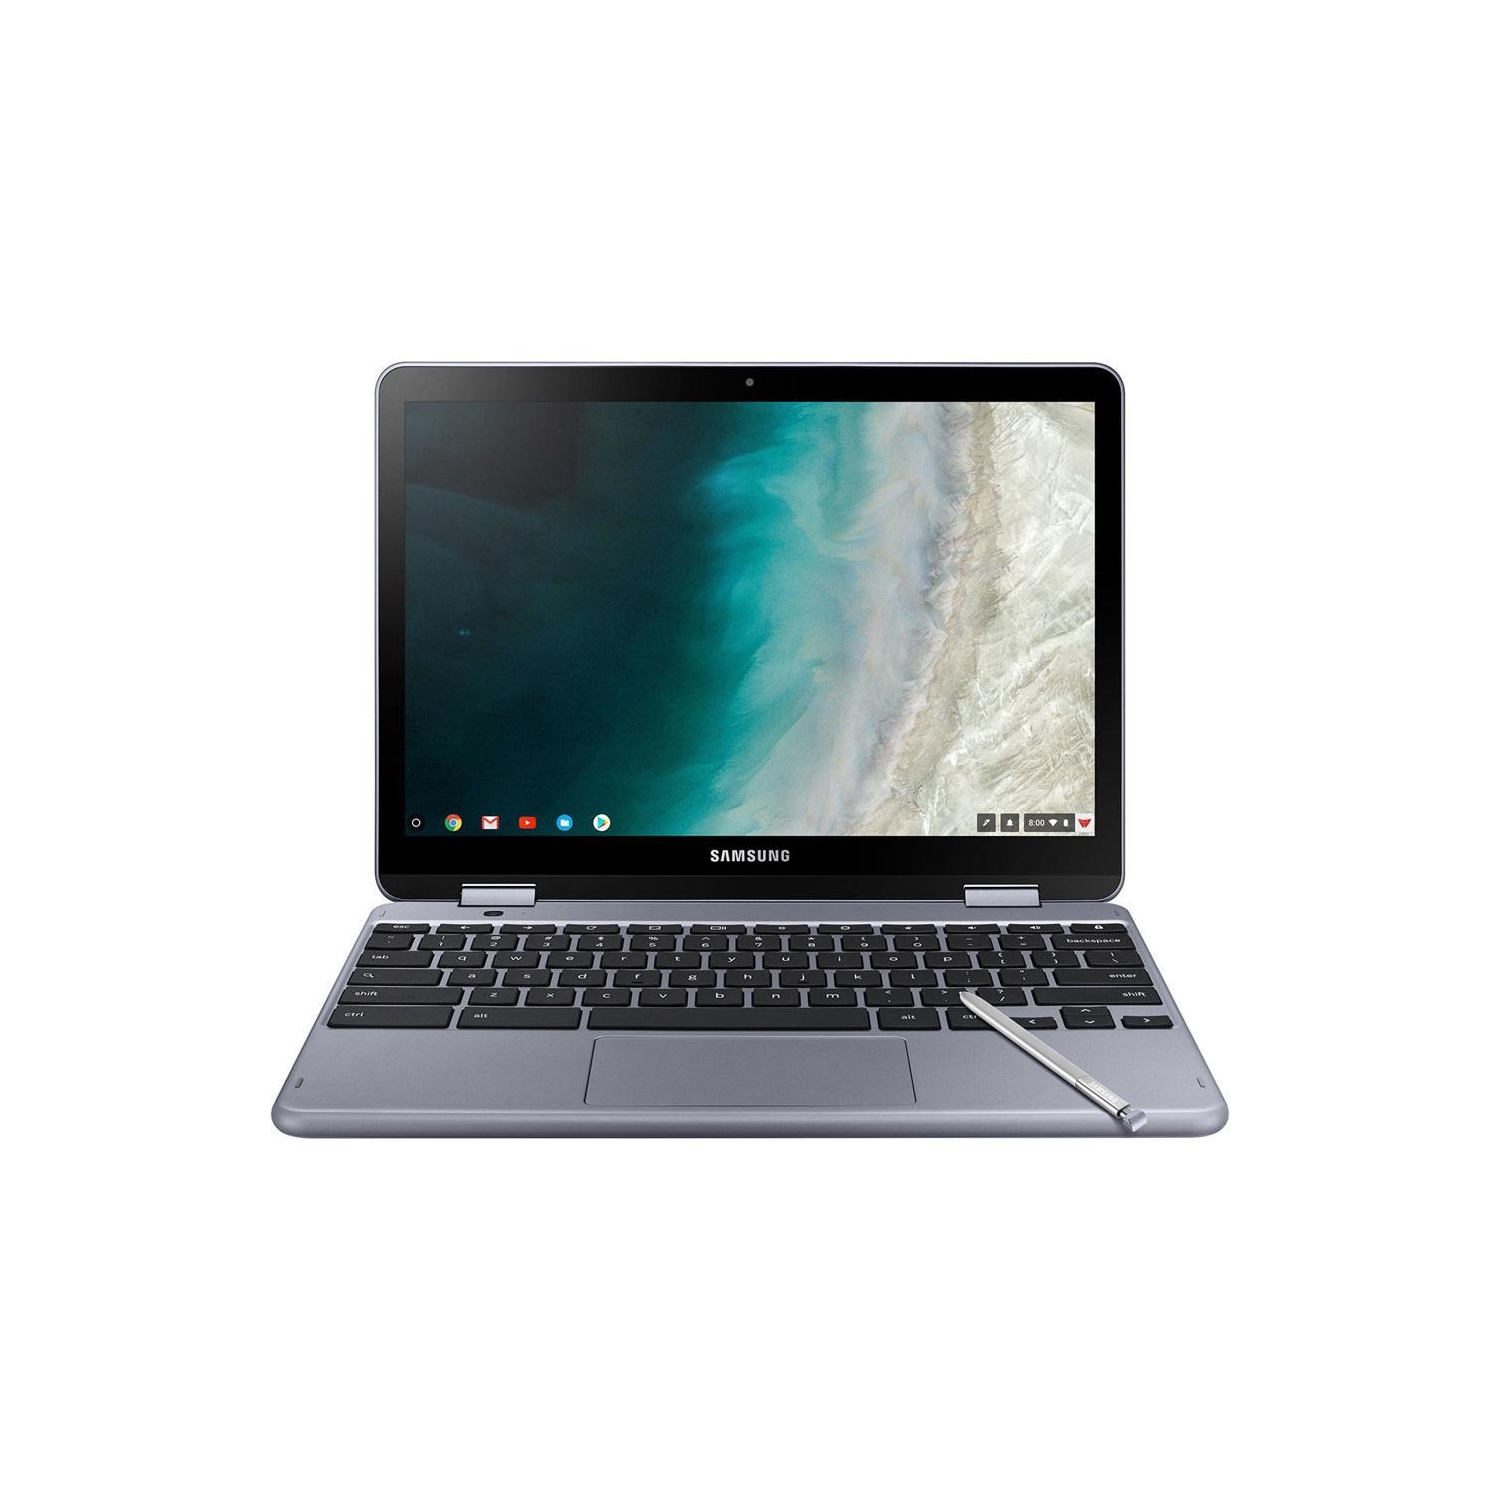 Samsung Chromebook Plus 12.2" Touchscreen 2-IN-1 4GB RAM 32GB eMMC Convertible with Pen Chrome OS Refurbished Good